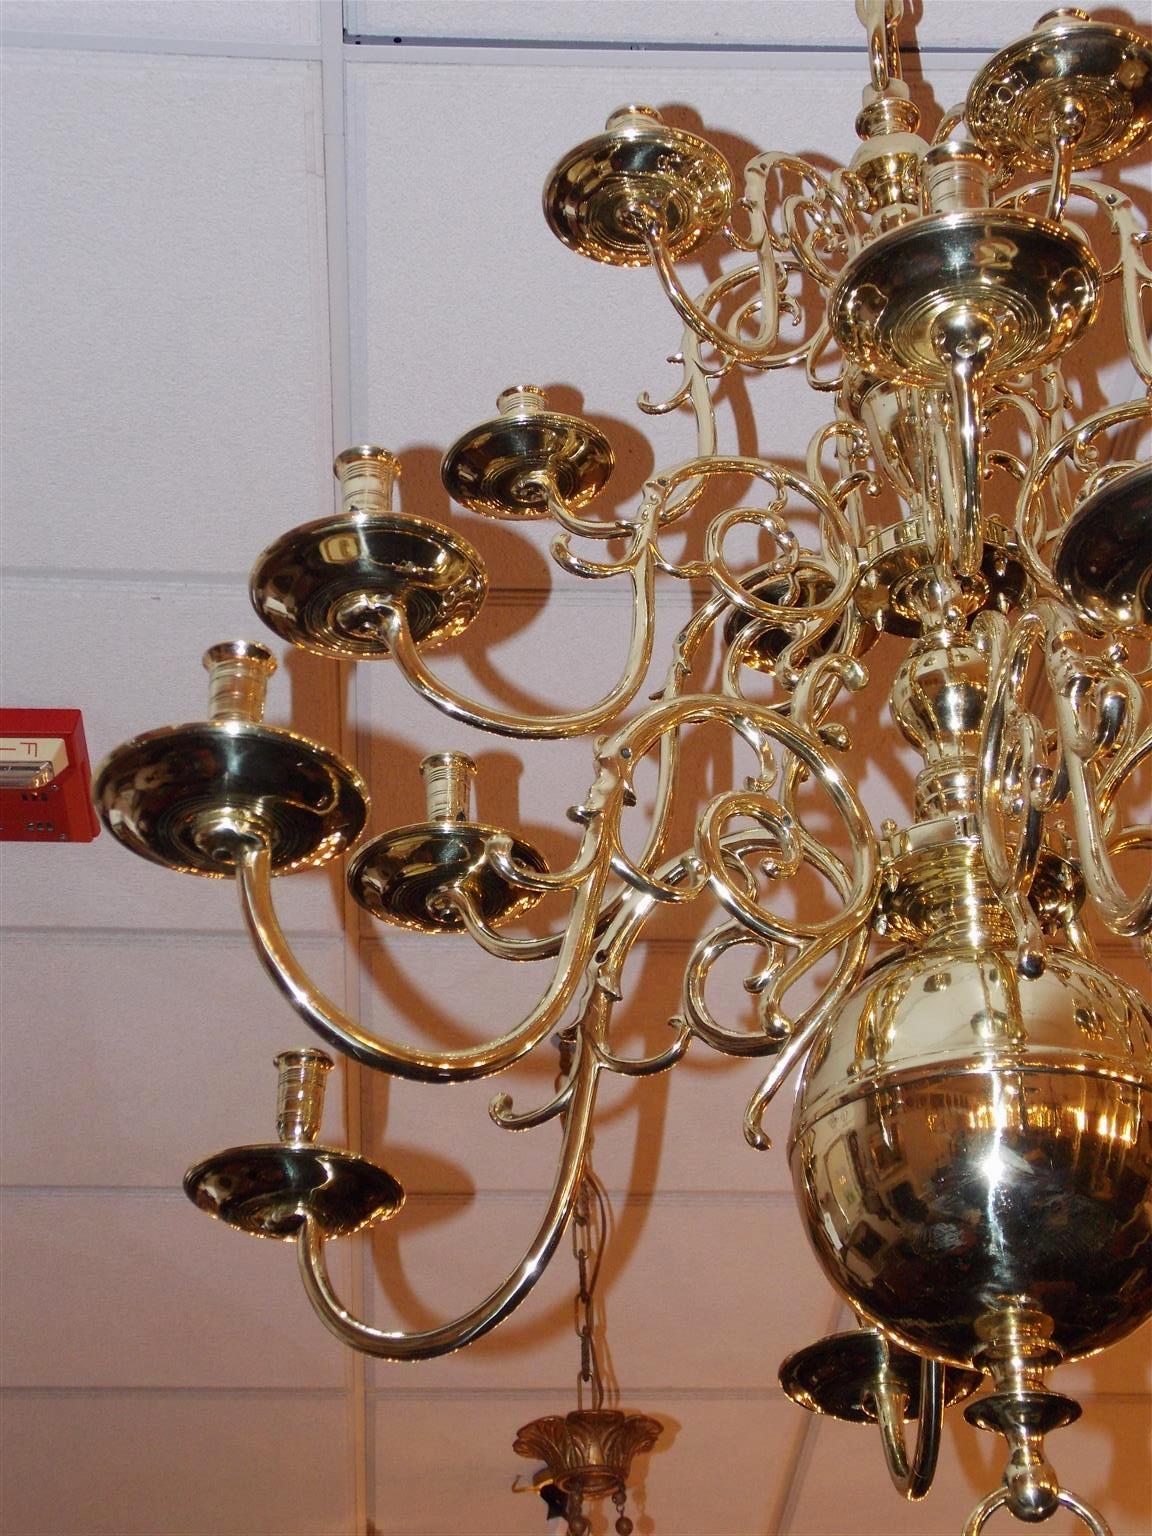 Dutch Colonial Brass Three-Tier Bulbous and Scrolled Chandelier, Circa 1760 (Gegossen)